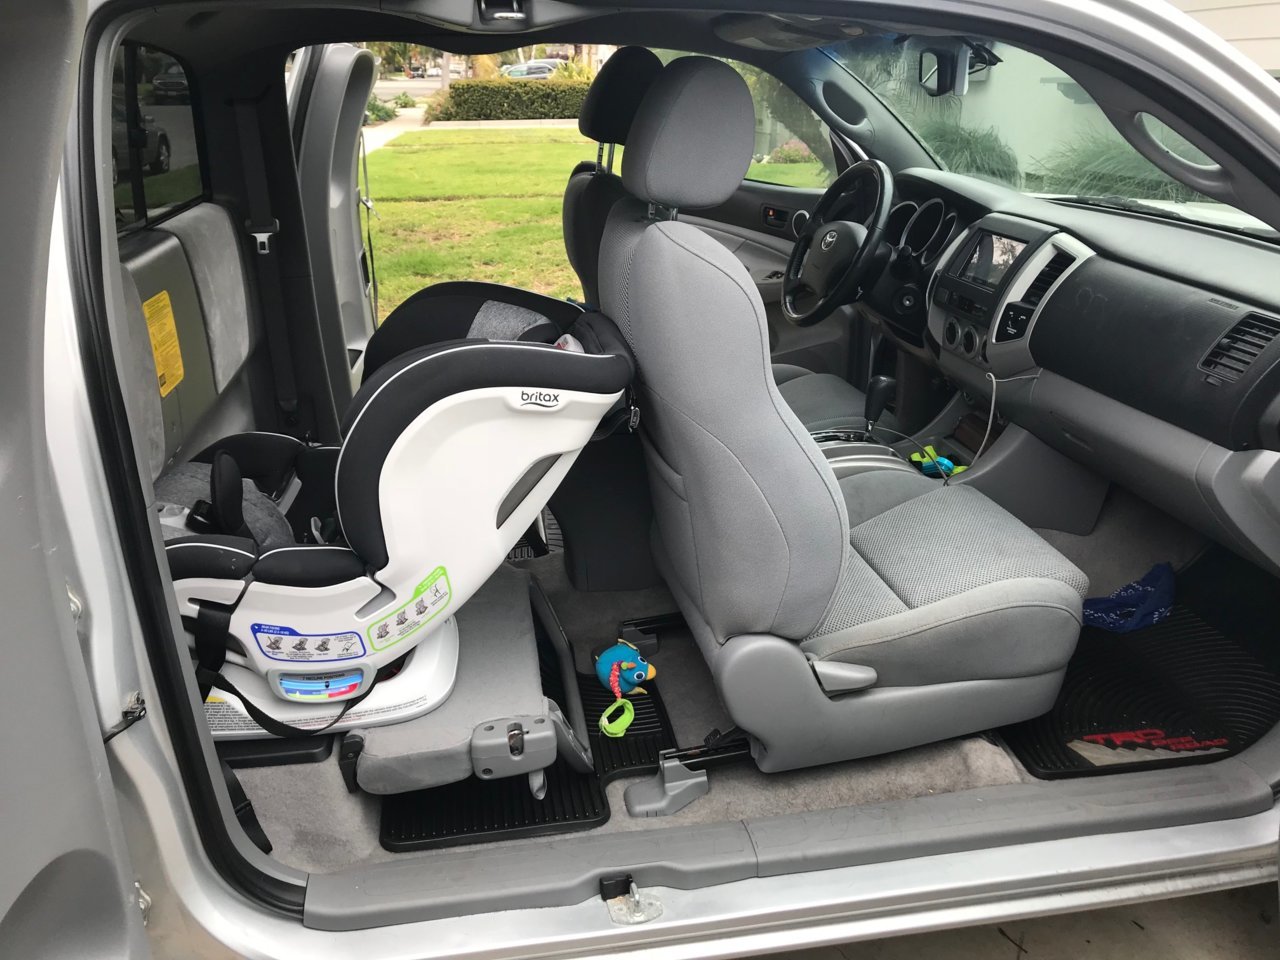 Best Car Seat For Extended Cab Truck, Toyota Tacoma Access Cab Car Seat